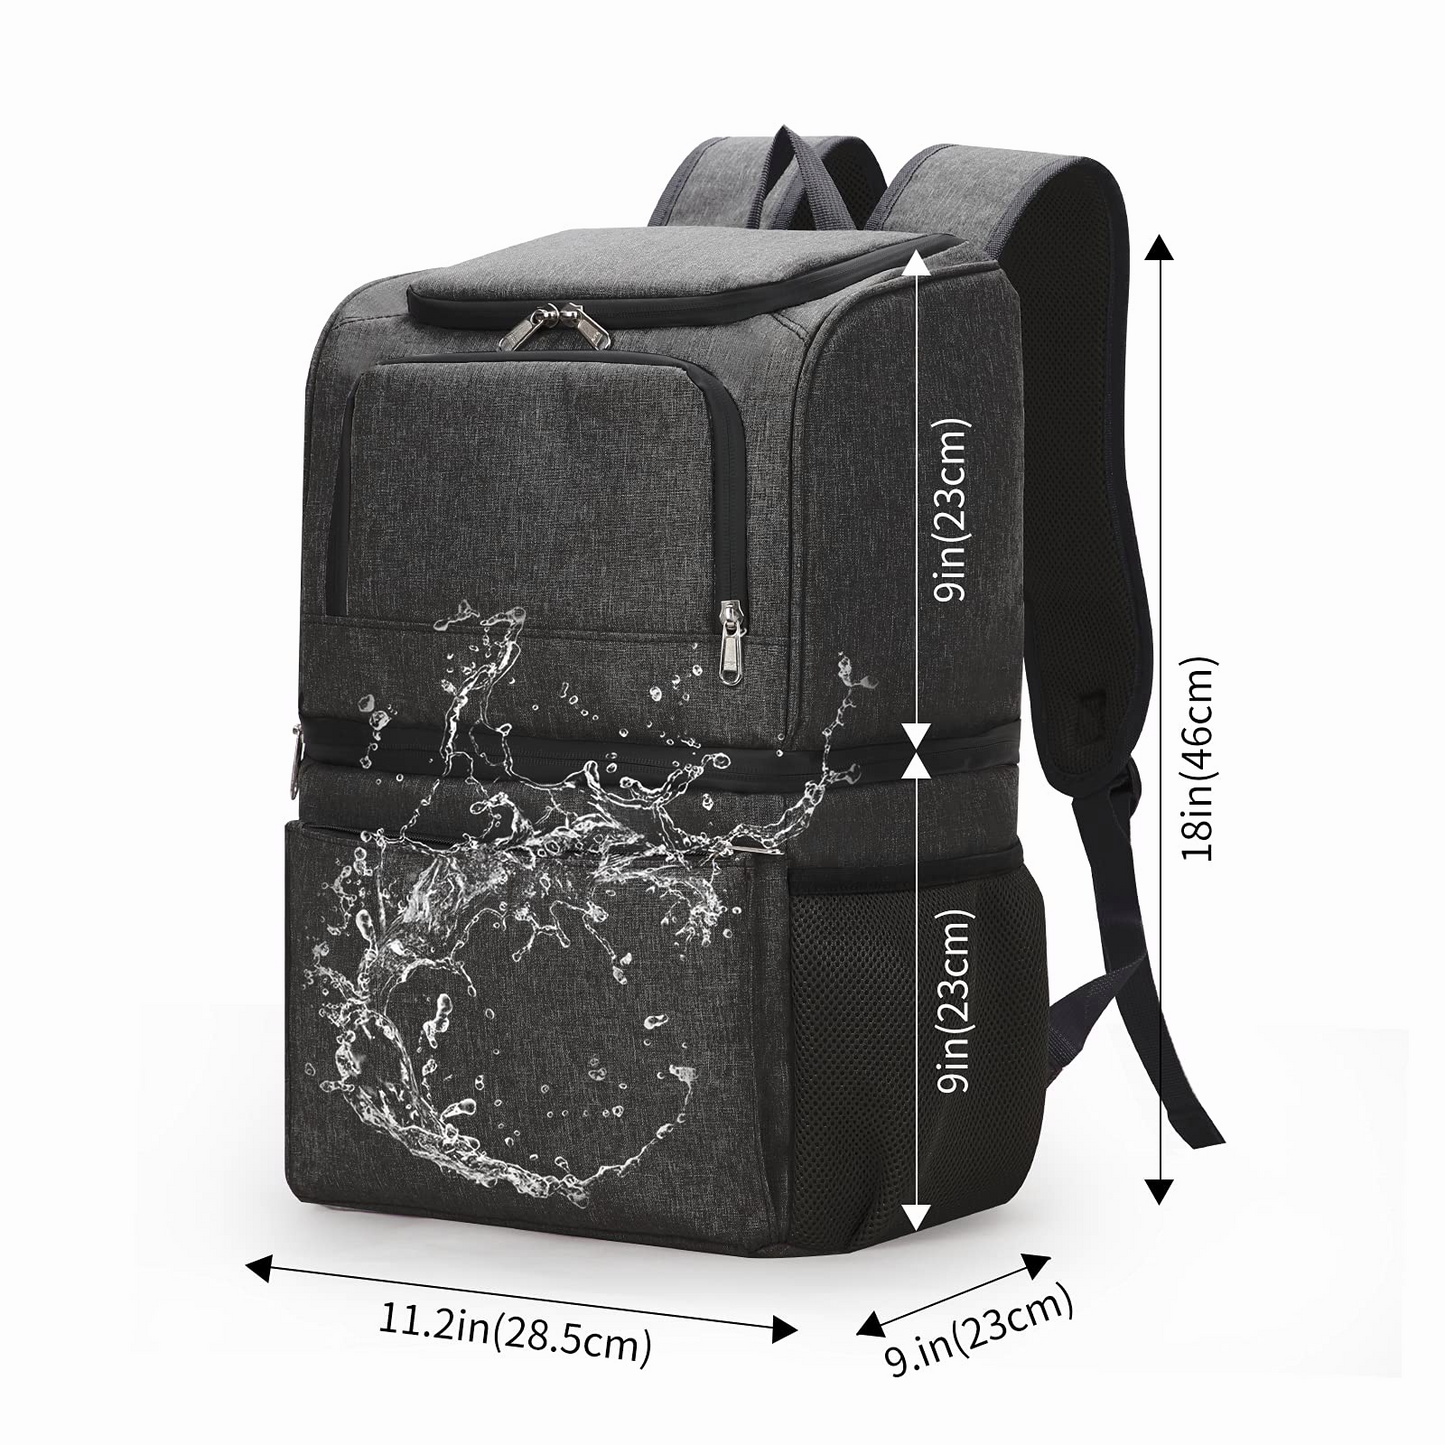 YH&GS Cooler Backpack,26 Cans Insulated Cooler Backpack Leakproof Cooler Bag with Double Deck Large Capacity Lunch Backpack,Soft Light